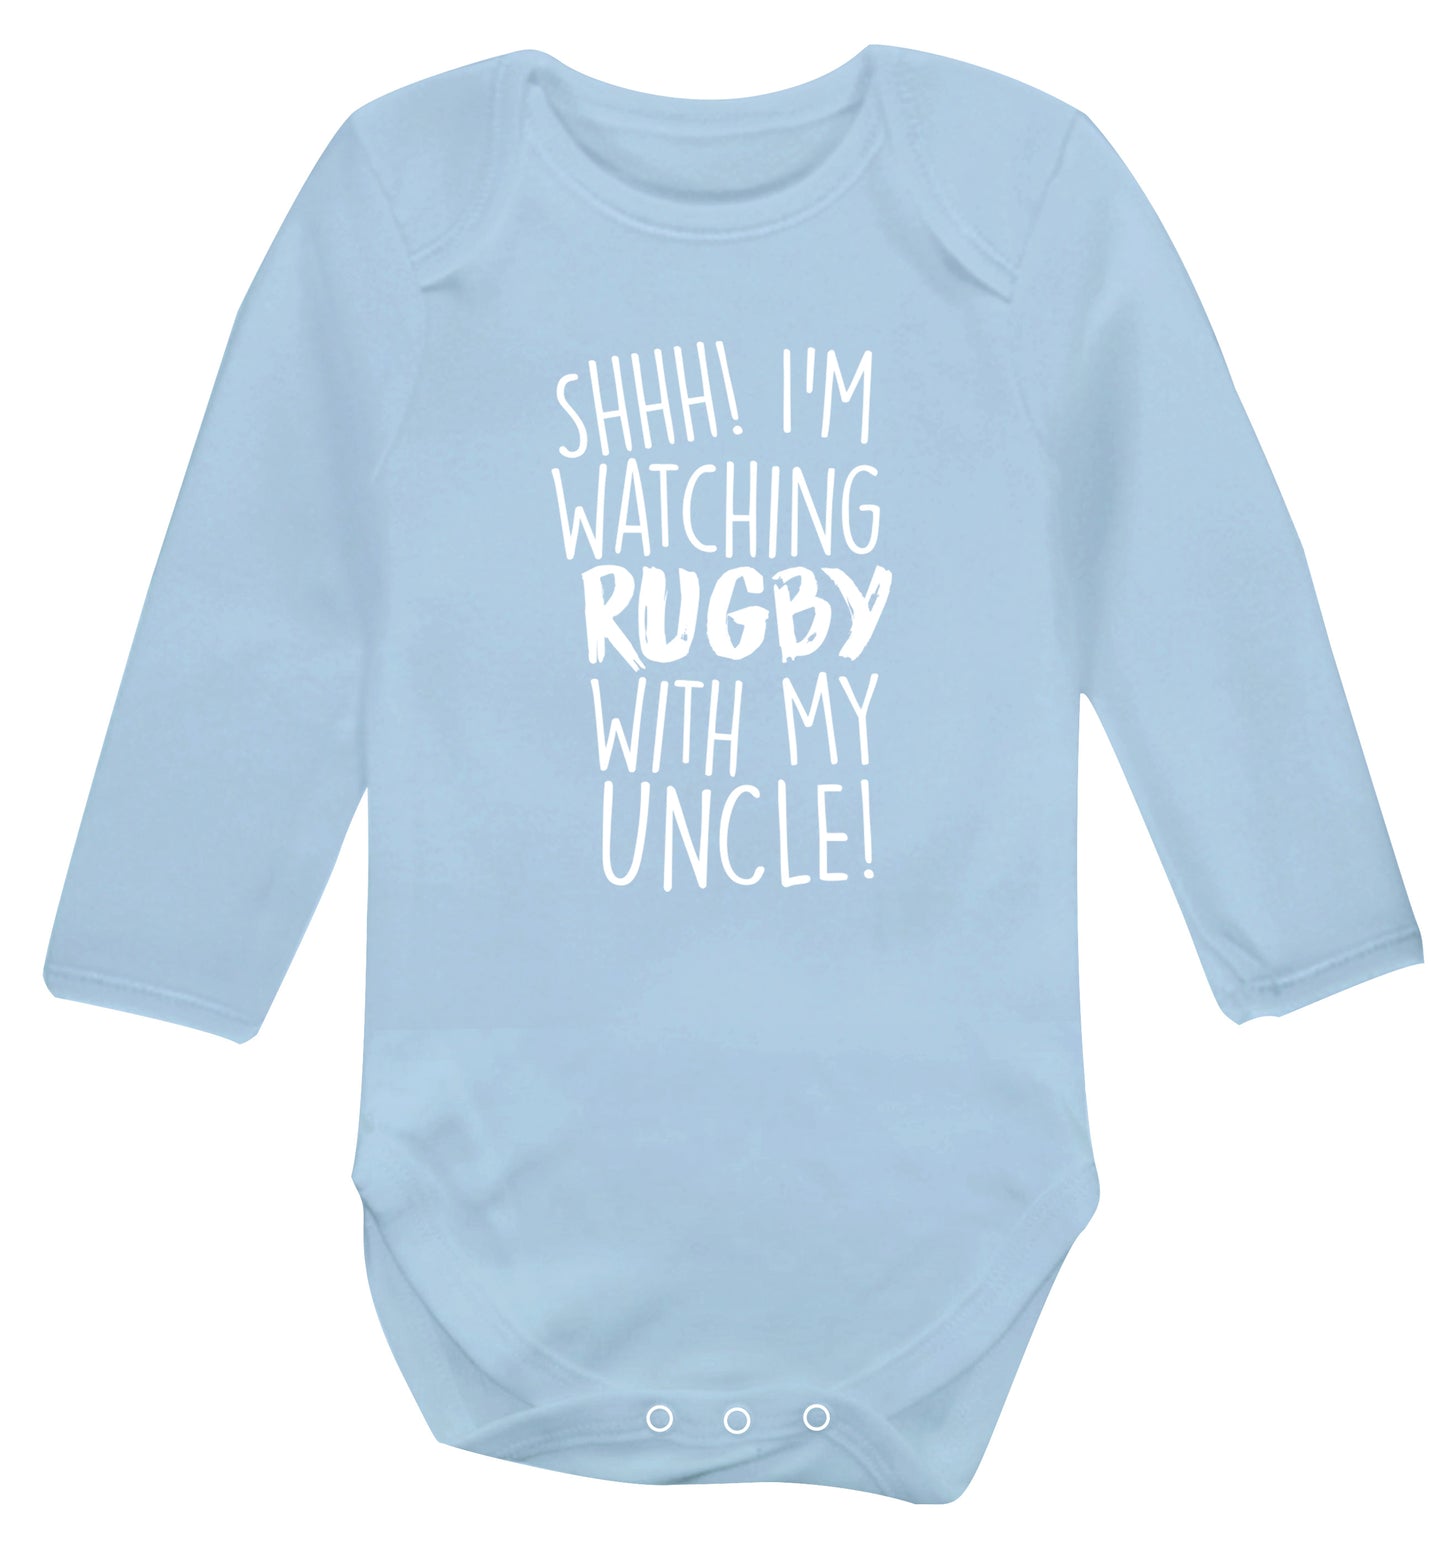 Shh.. I'm watching rugby with my uncle Baby Vest long sleeved pale blue 6-12 months